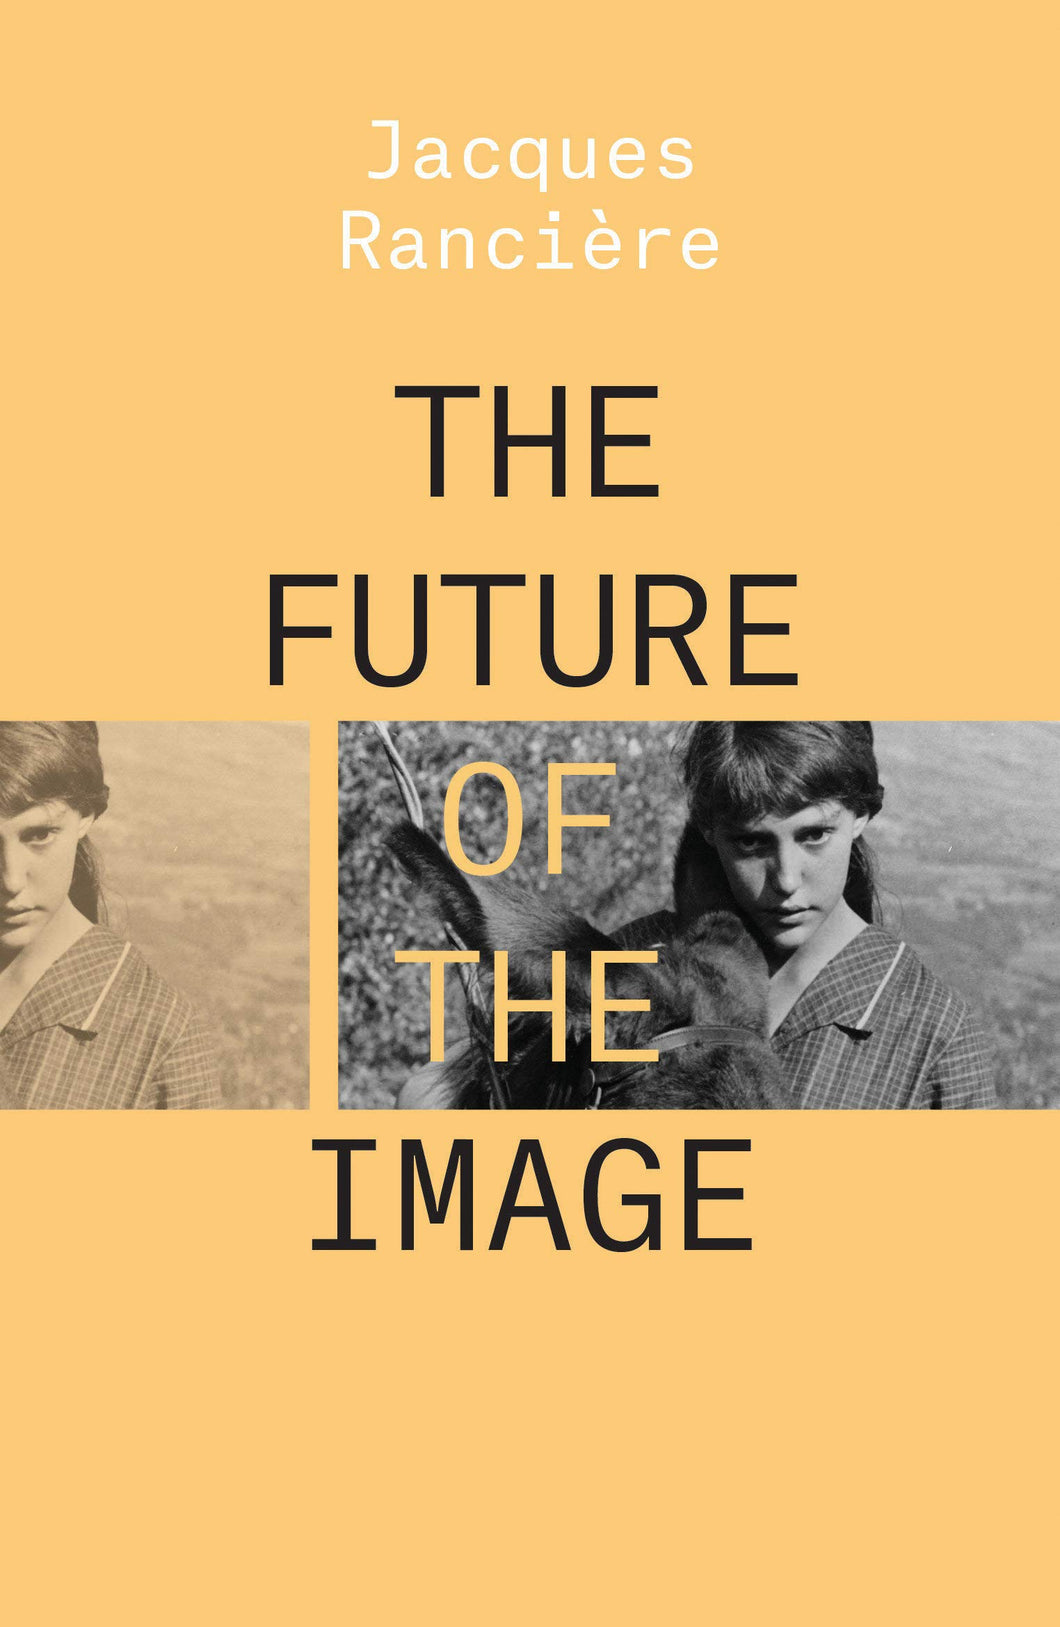 The Future of the Image by Jacques Rancière